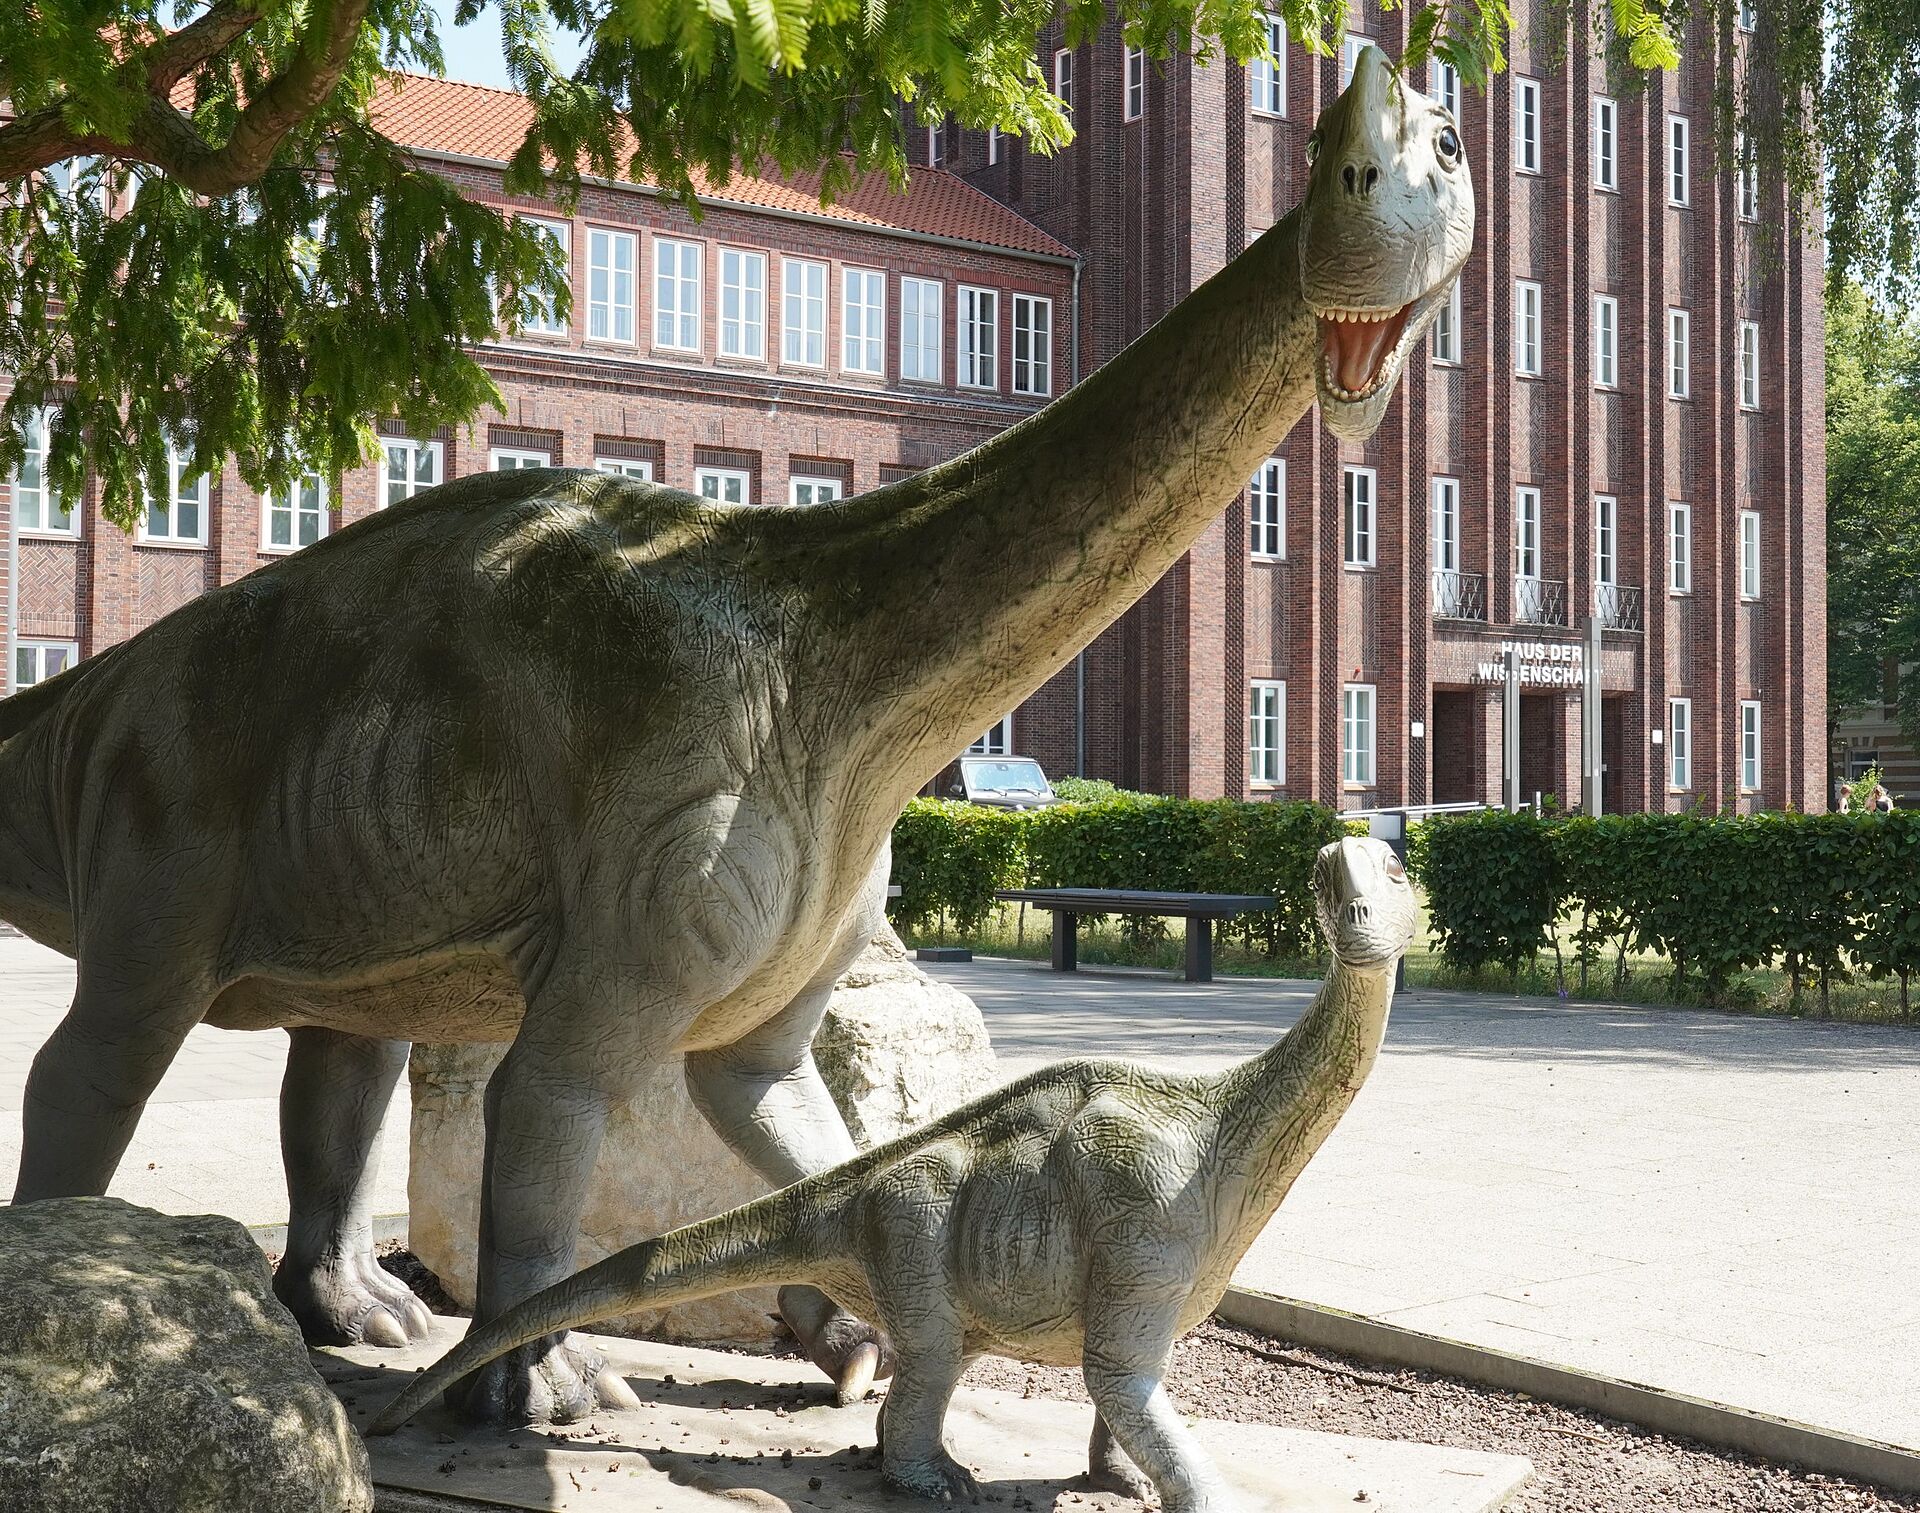 Dinosaur models in front of the Natural History Museum with the House of Science in the background